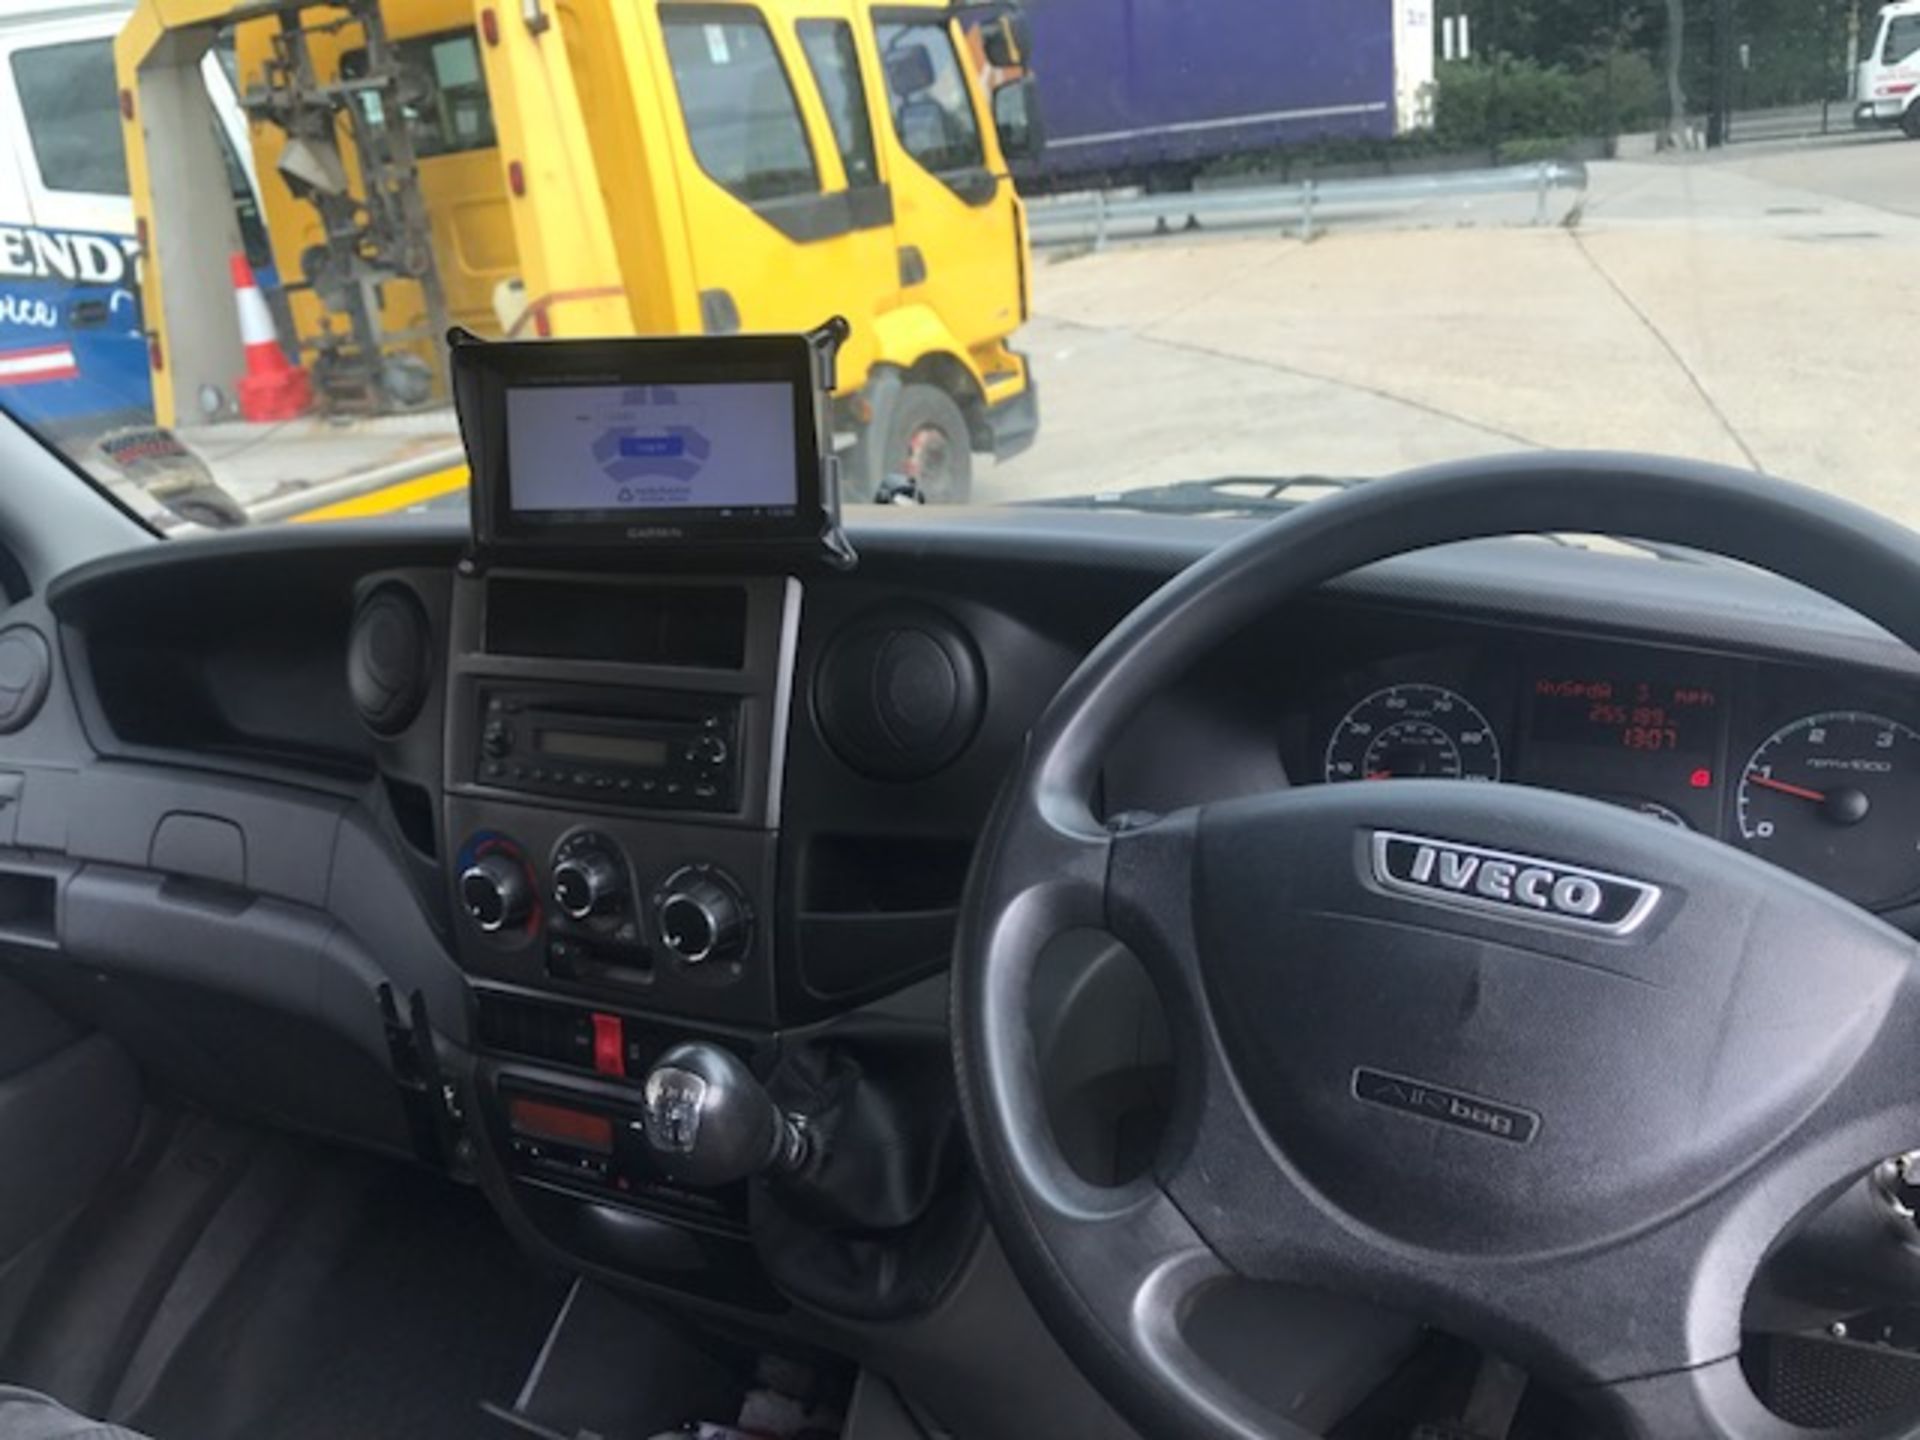 2013 Iveco 70C17 EEV 6.7T crew cabcomplete with Roger Dyson Group body and built in Garmin satnav - Image 10 of 14